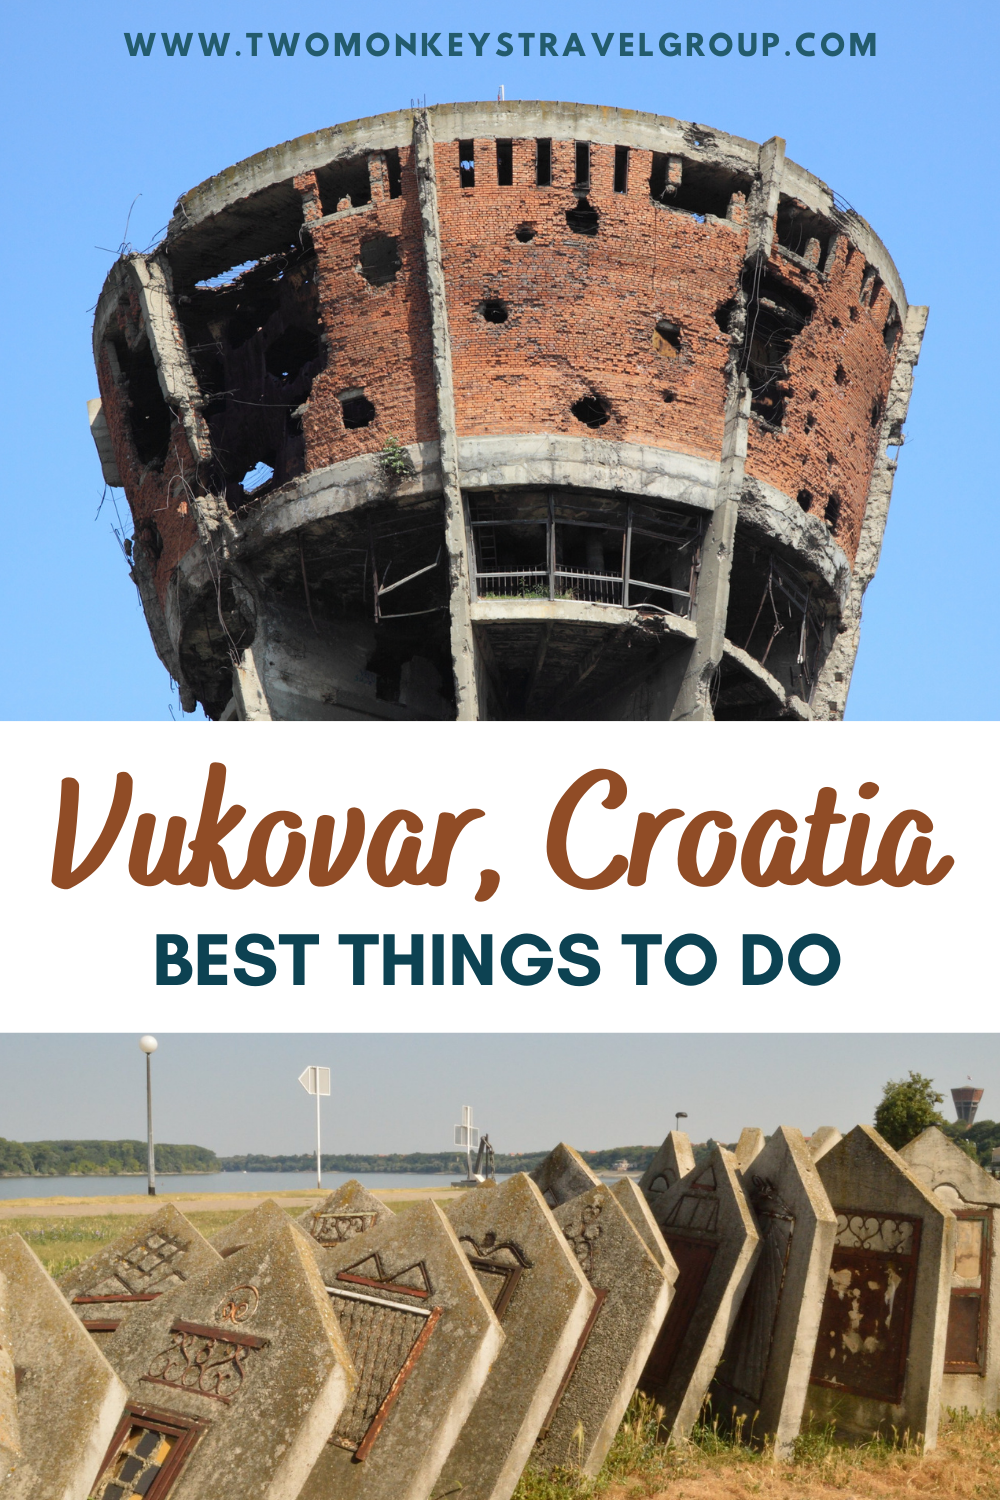 6 Best Things to do in Vukovar, Croatia and Where to Stay